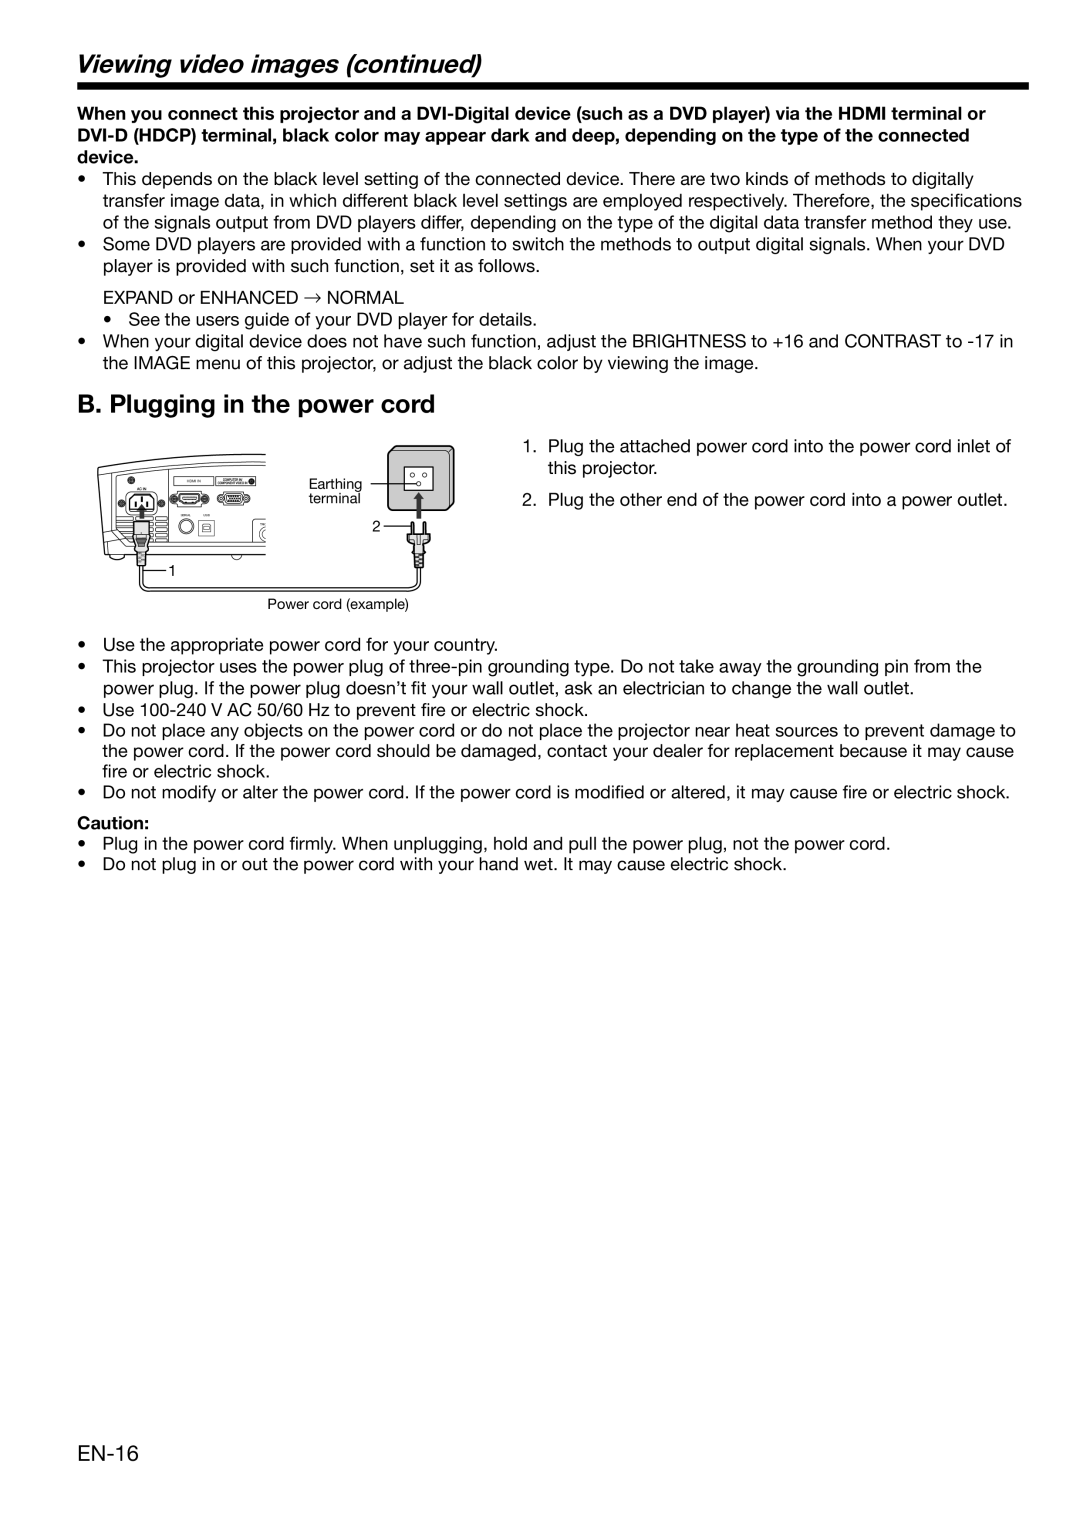 Mitsubishi Electronics HC3100 user manual B. Plugging in the power cord, Viewing video images continued, EN-16 